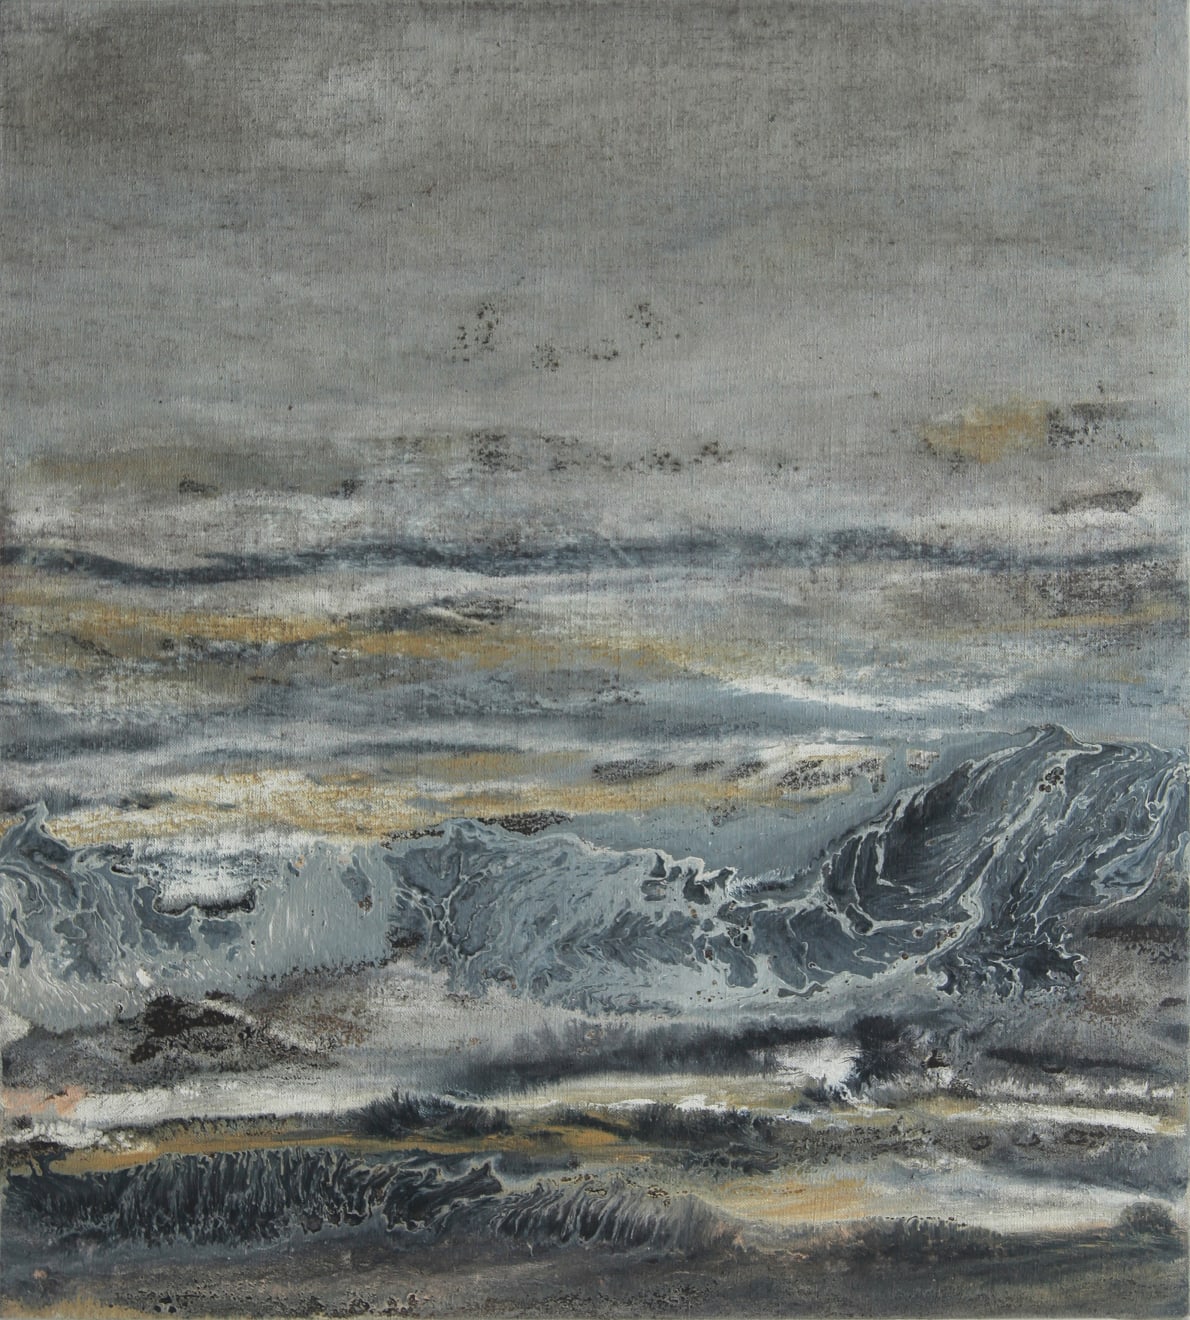 Estuary 05 Oil and Acrylic on Linen Mounted Board 53 x 63.5cm AUD $1400 SOLD